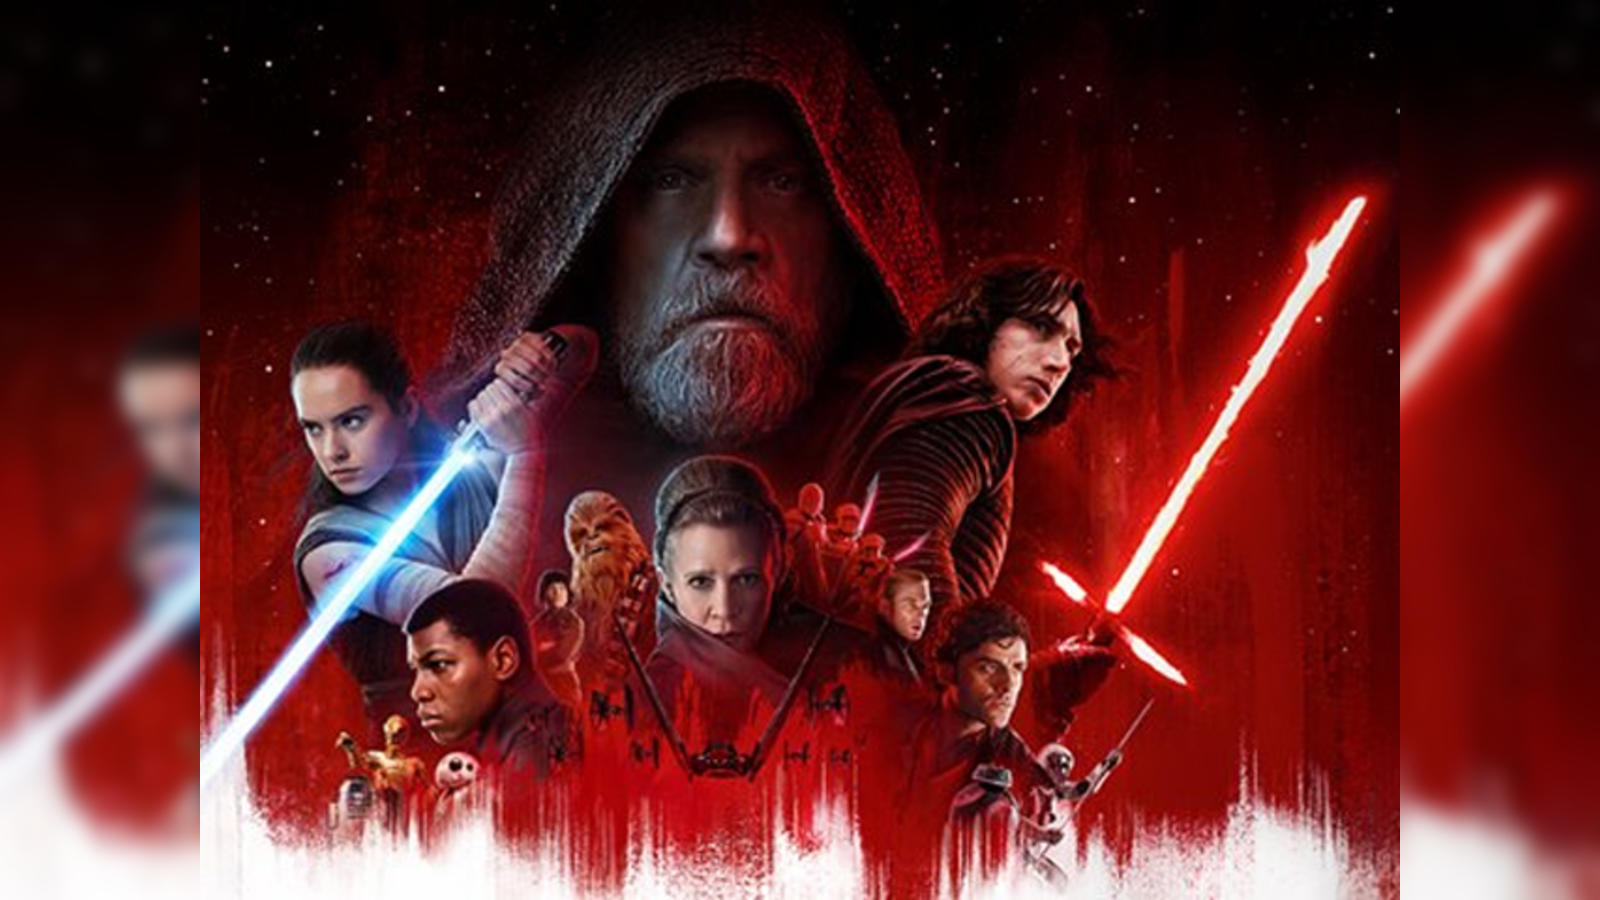 Star Wars: The Last Jedi' review: A visual delight accompanied with stellar  performances by the ace star cast - The Economic Times